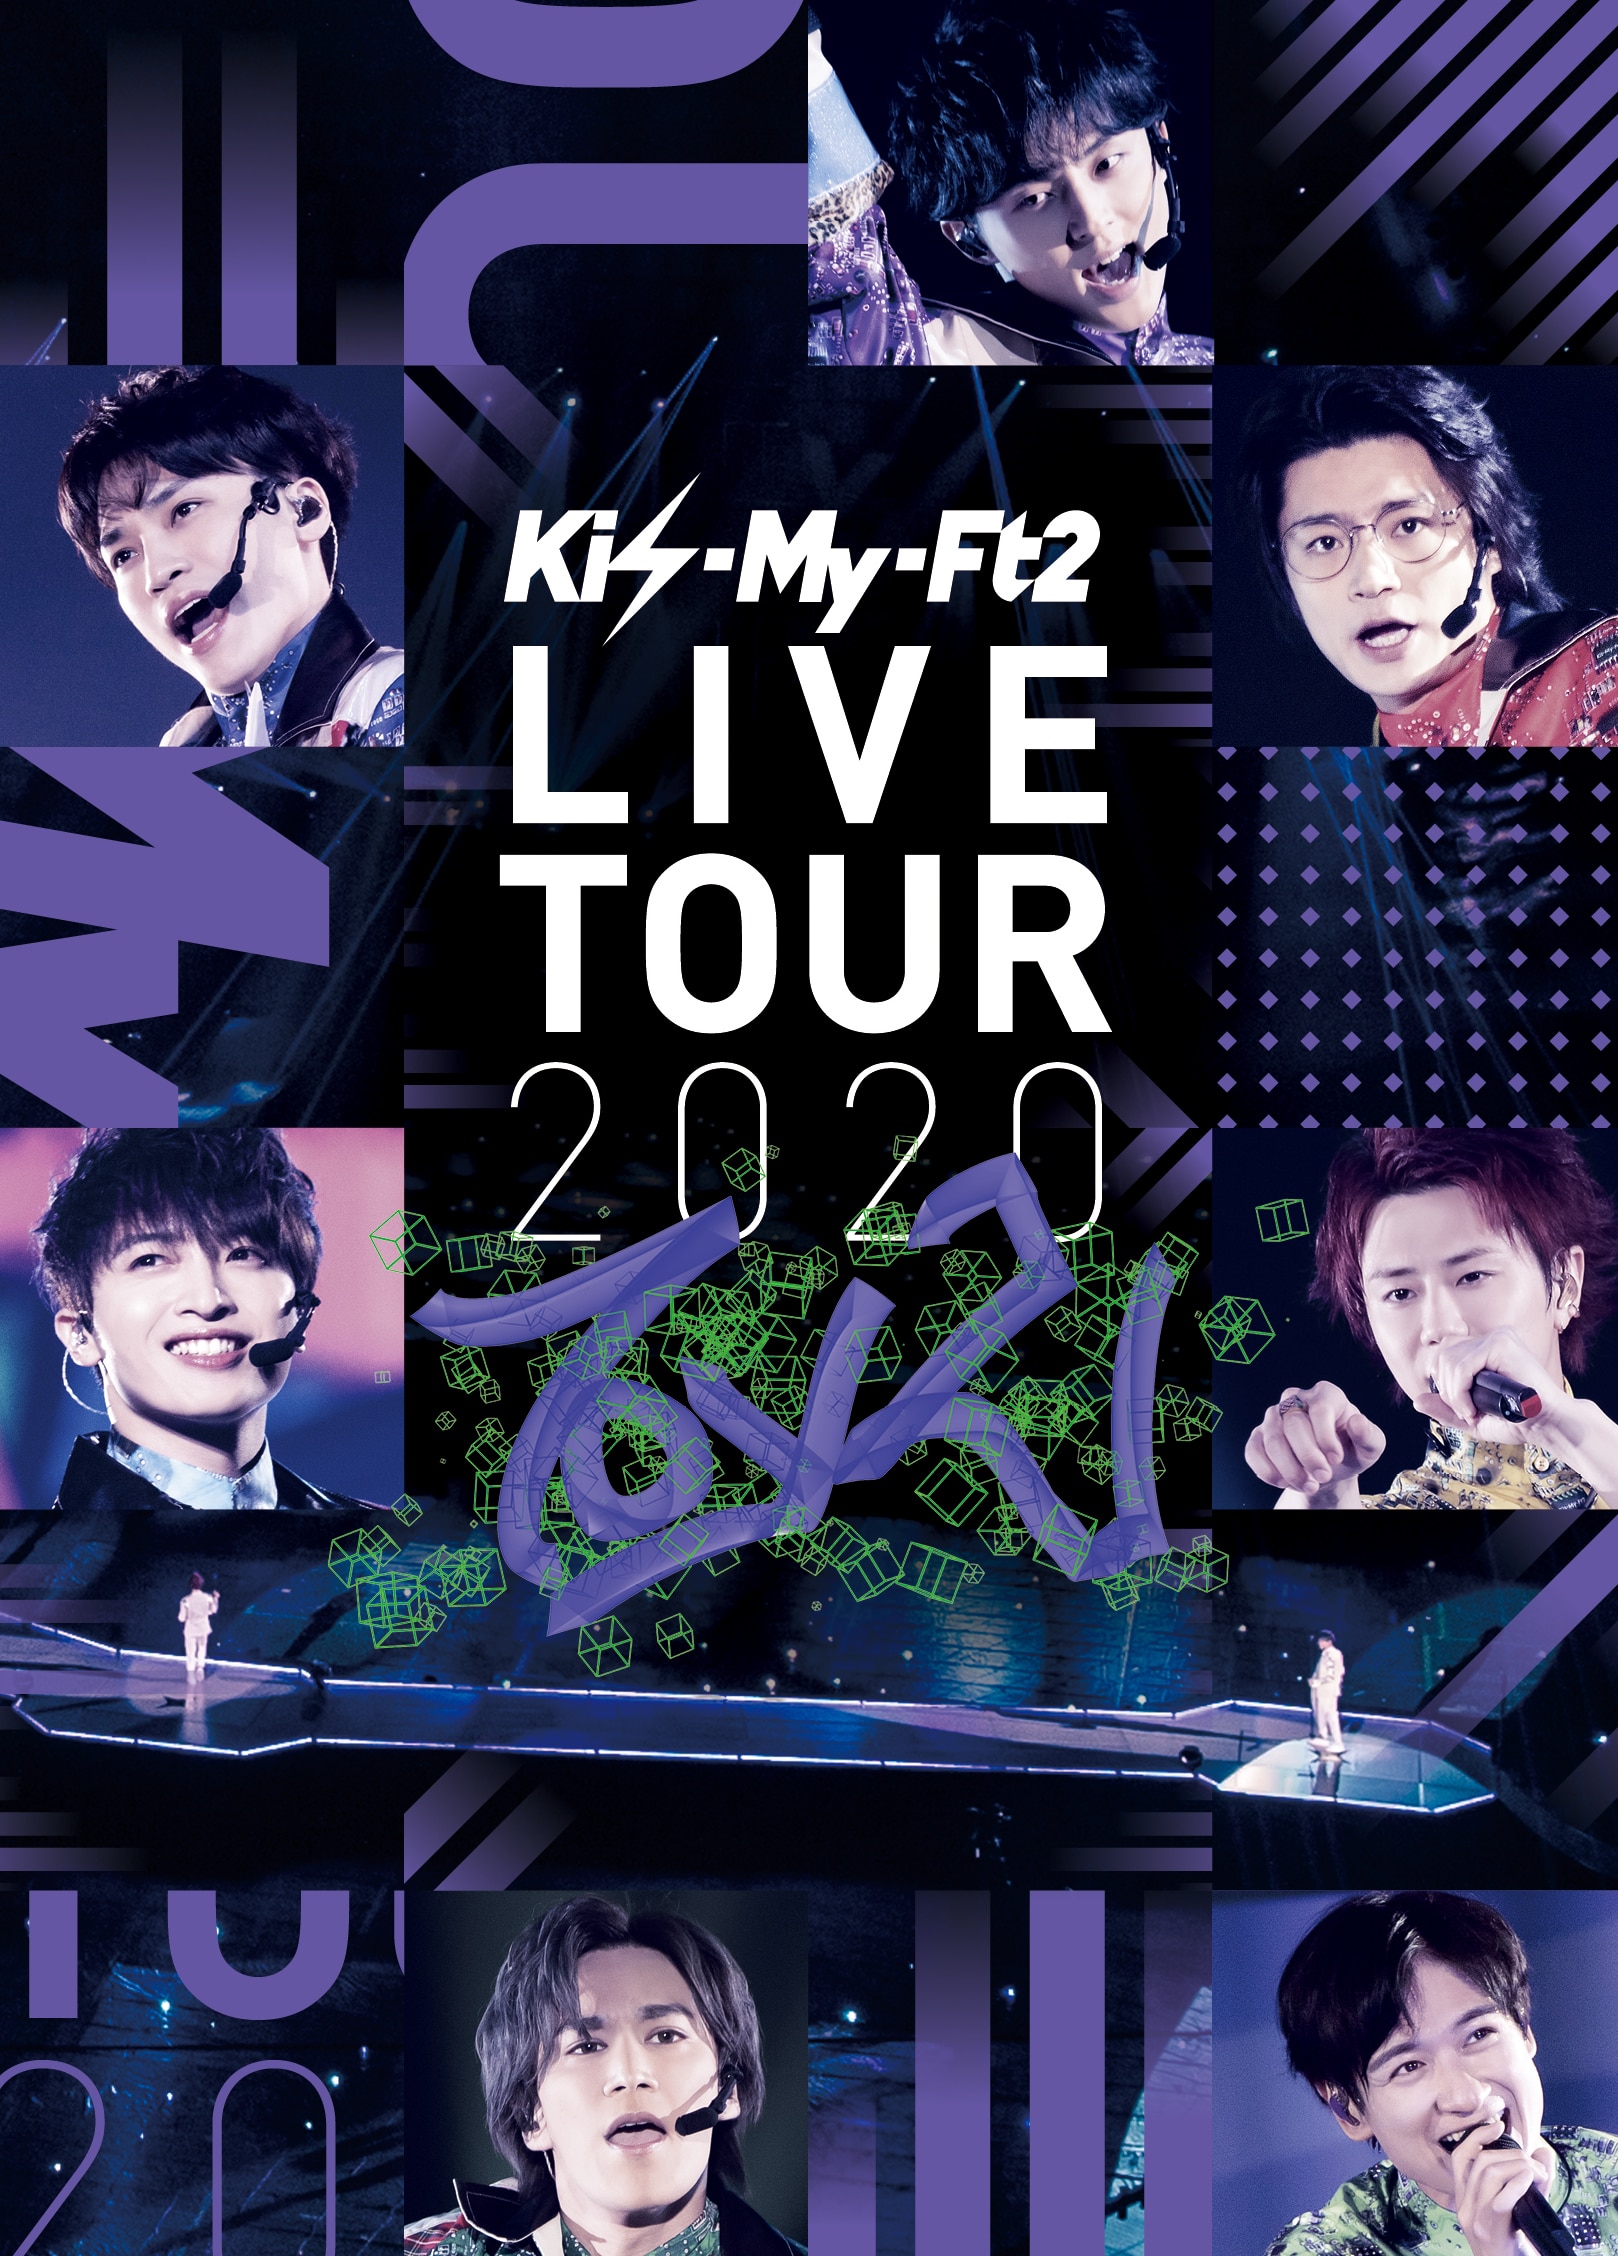 LIVE DVD  Blu-ray「Kis-My-Ft2 LIVE TOUR 2020 To-y2」 | Kis-My-Ft2｜MENT  RECORDING